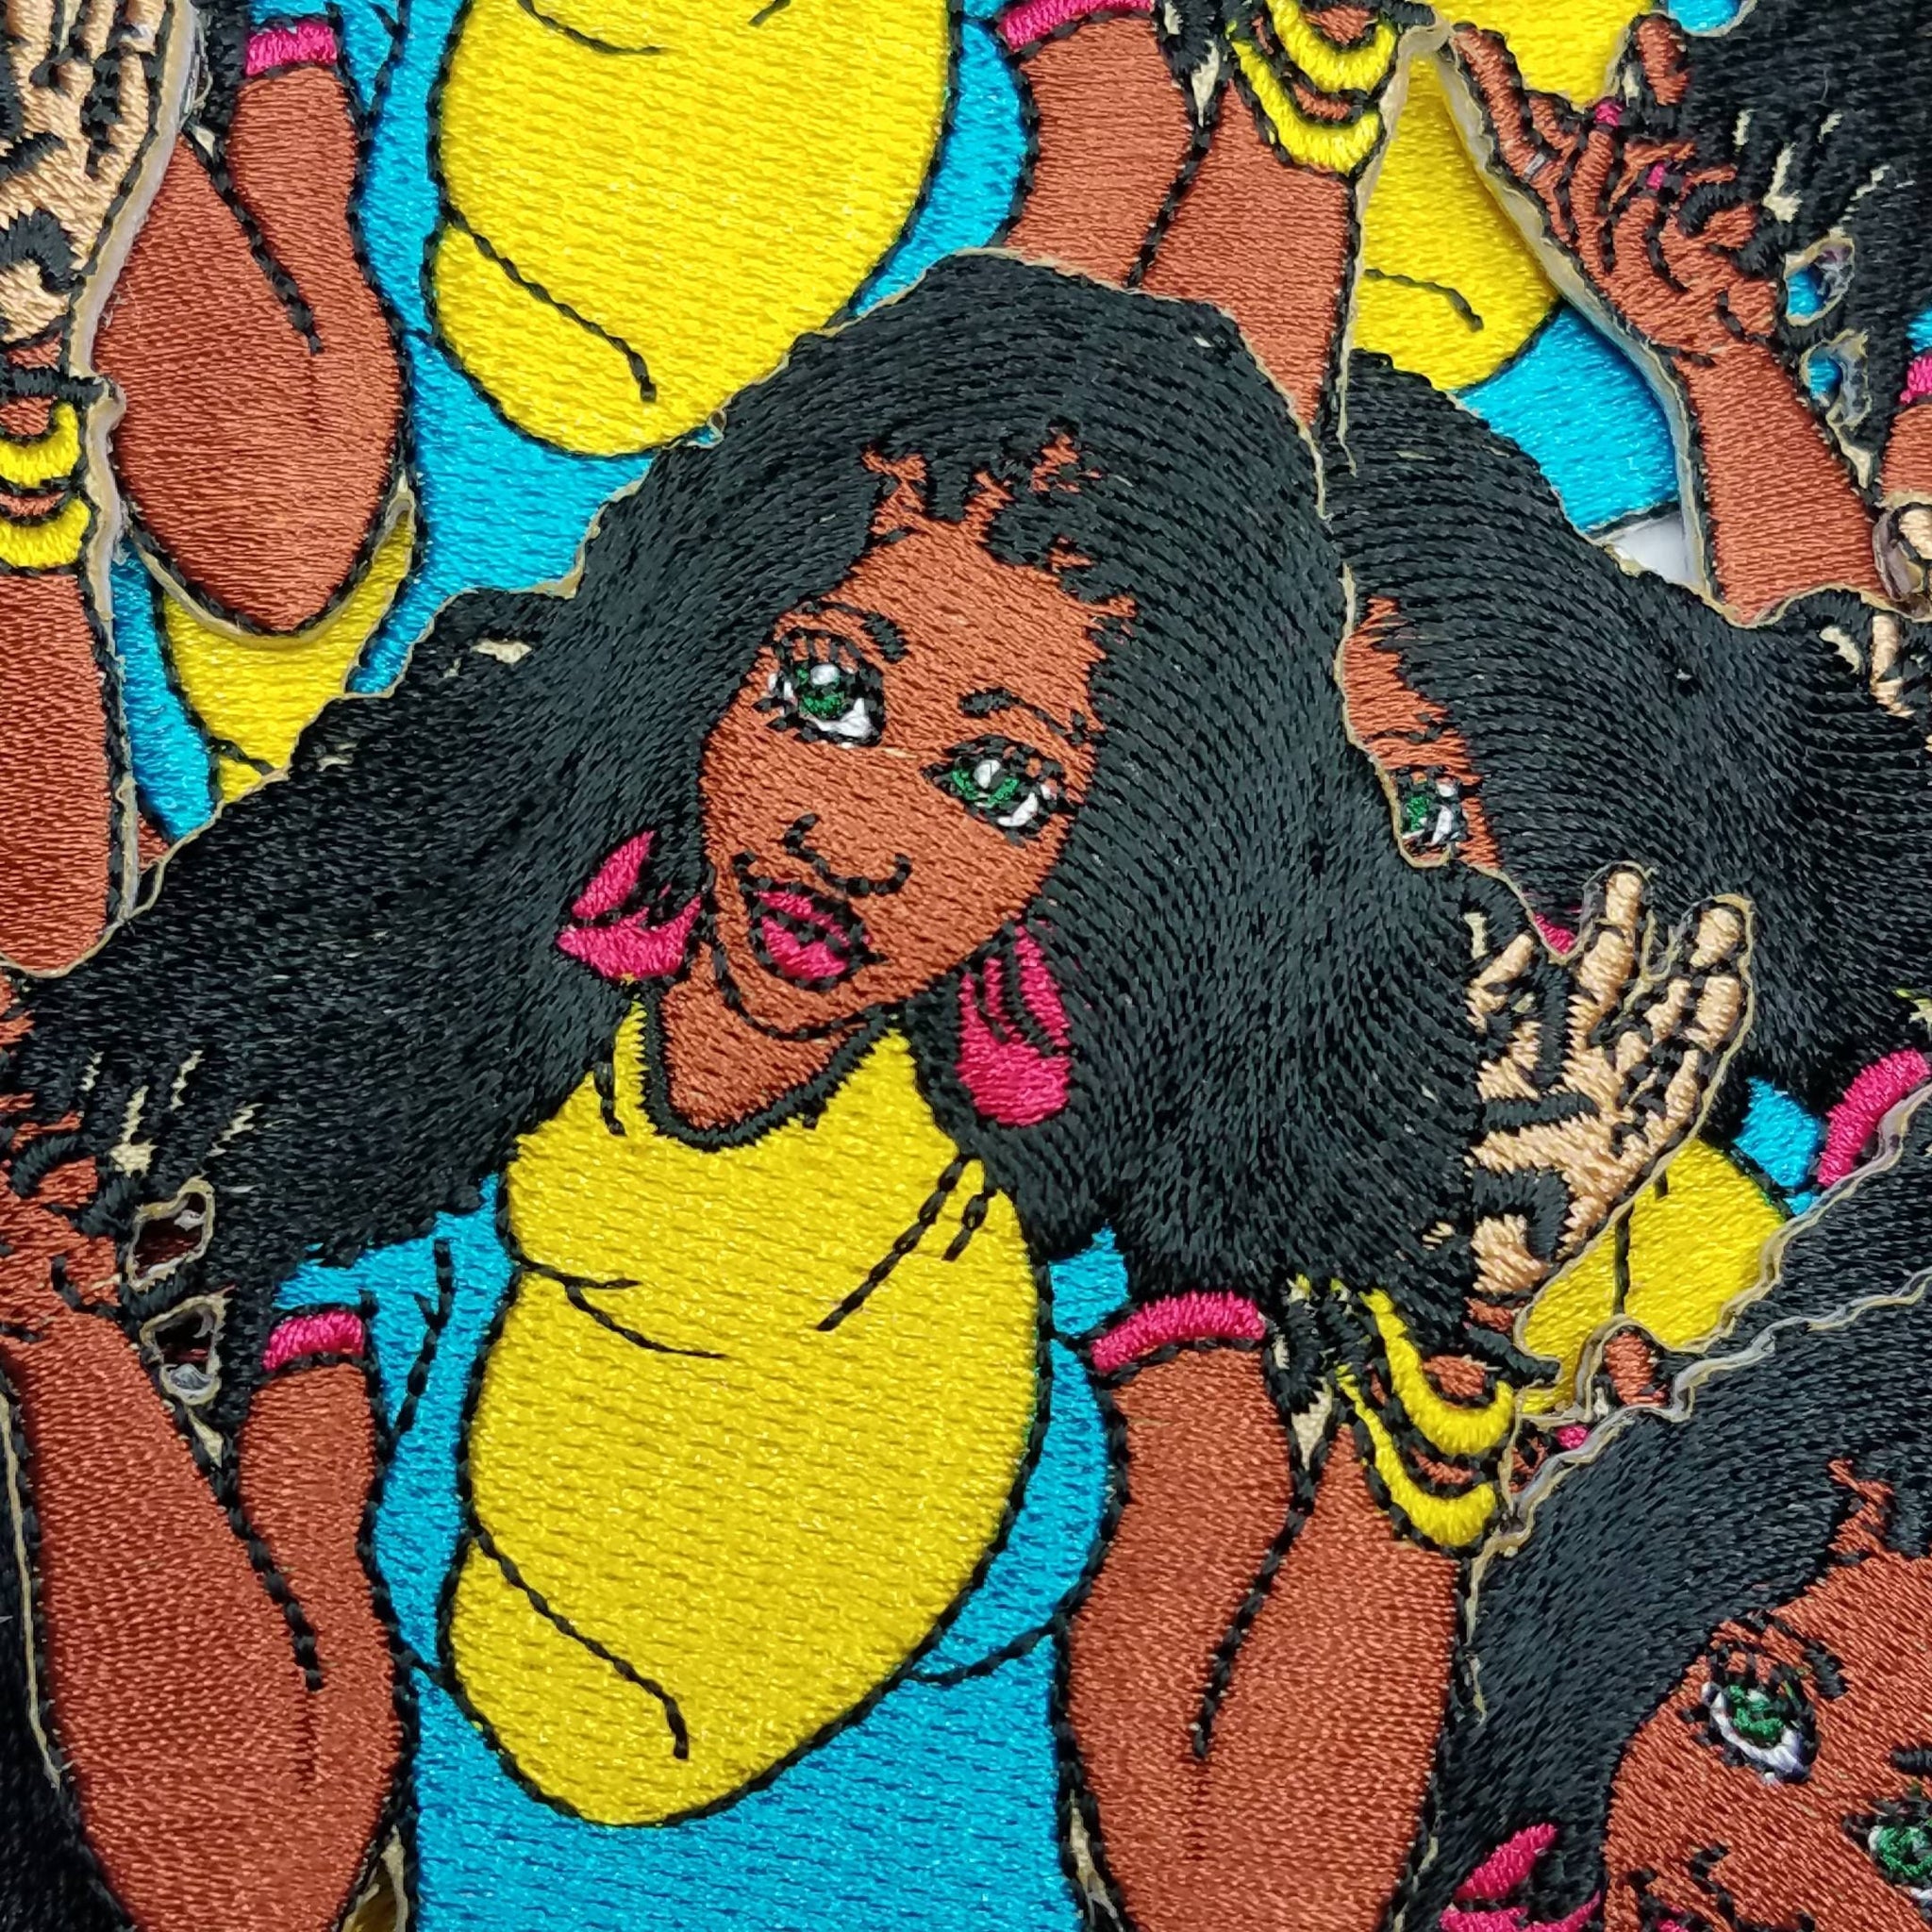 Exclusive "So what'cha saying?" Black girl, Iron on Embroidered Afrocentric Patch; Beautiful Black Girl Applique, Cool Patches for clothing